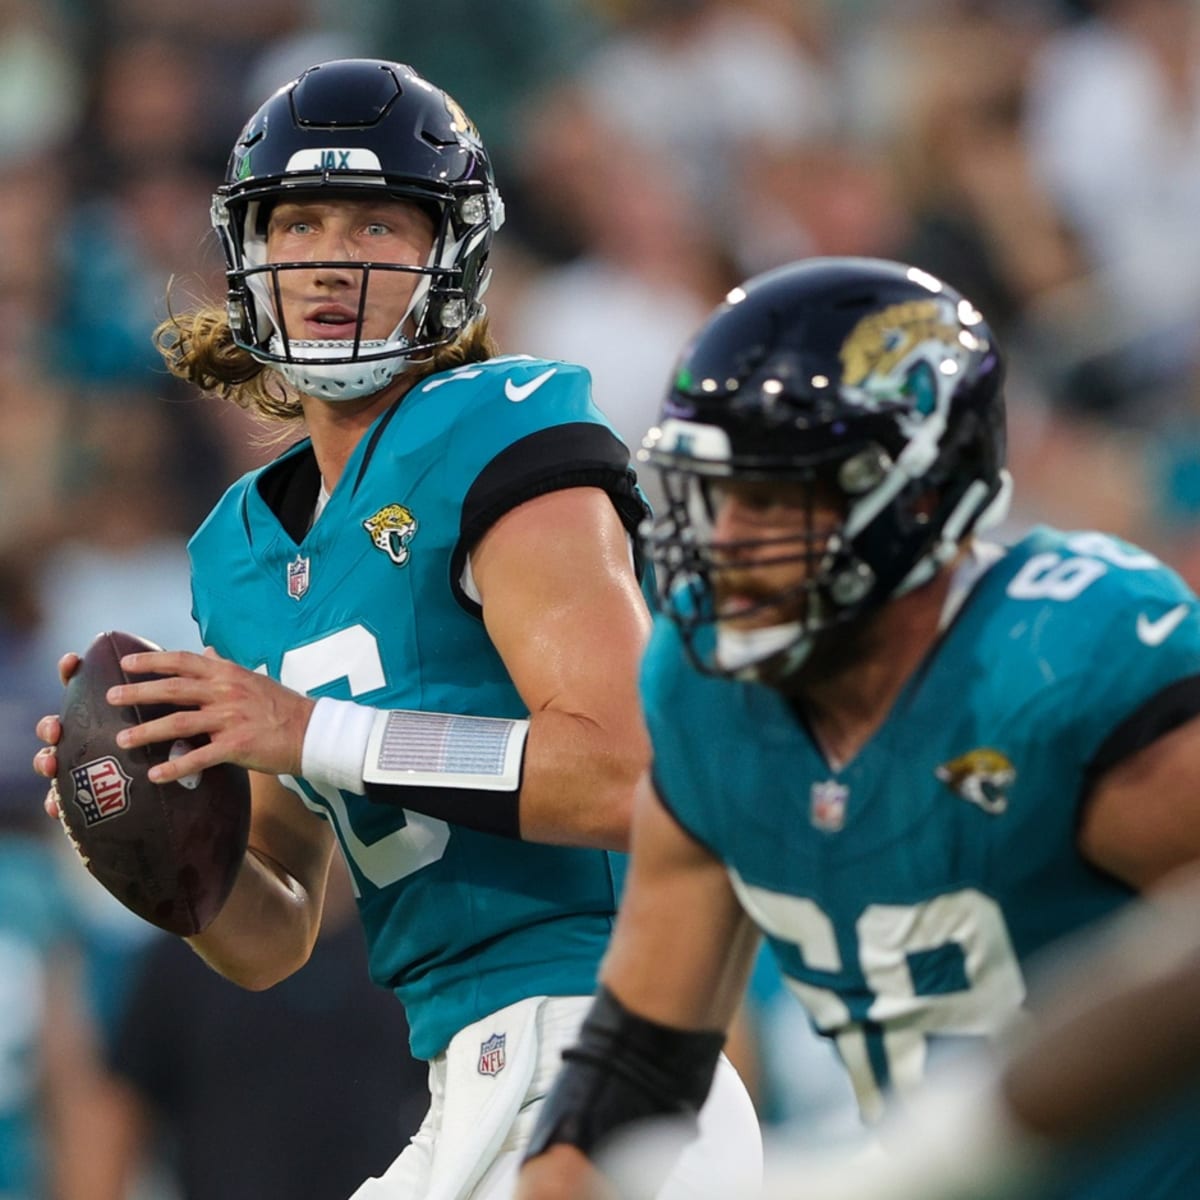 Top Plays That Lead to Jaguars 31-18 Victory Over Dolphins